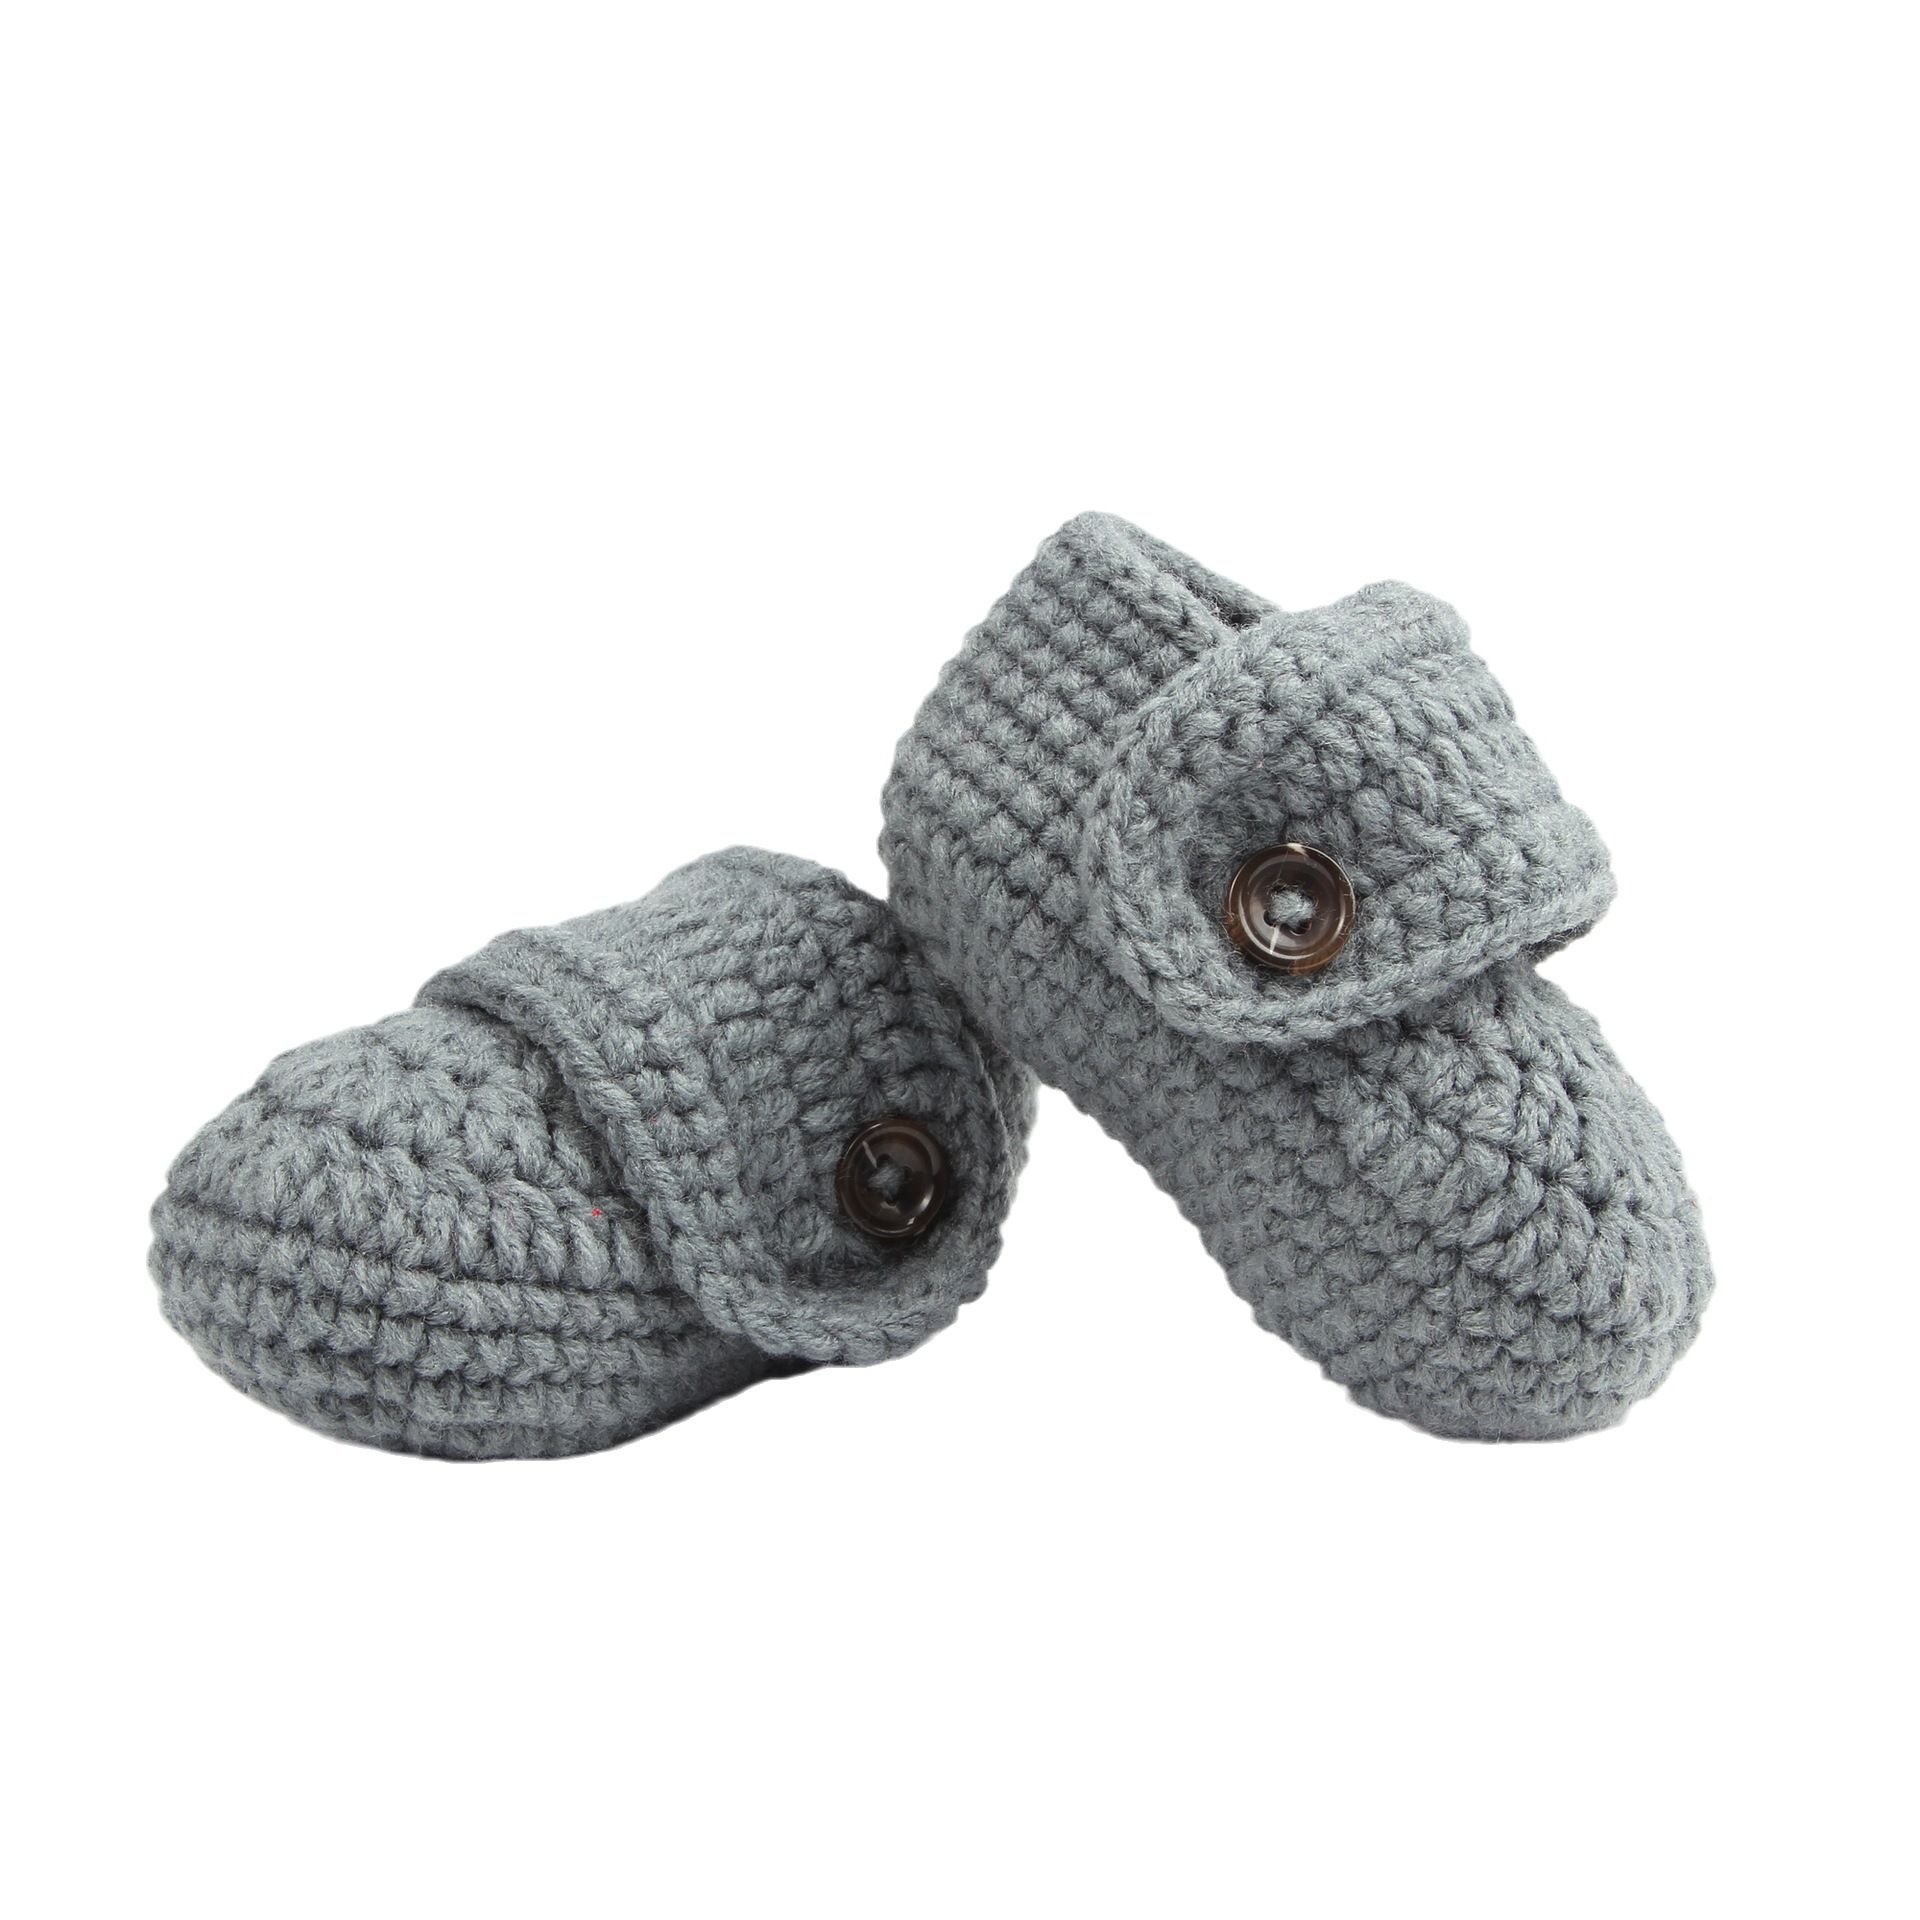 Baby's Hand knitted wool socks product